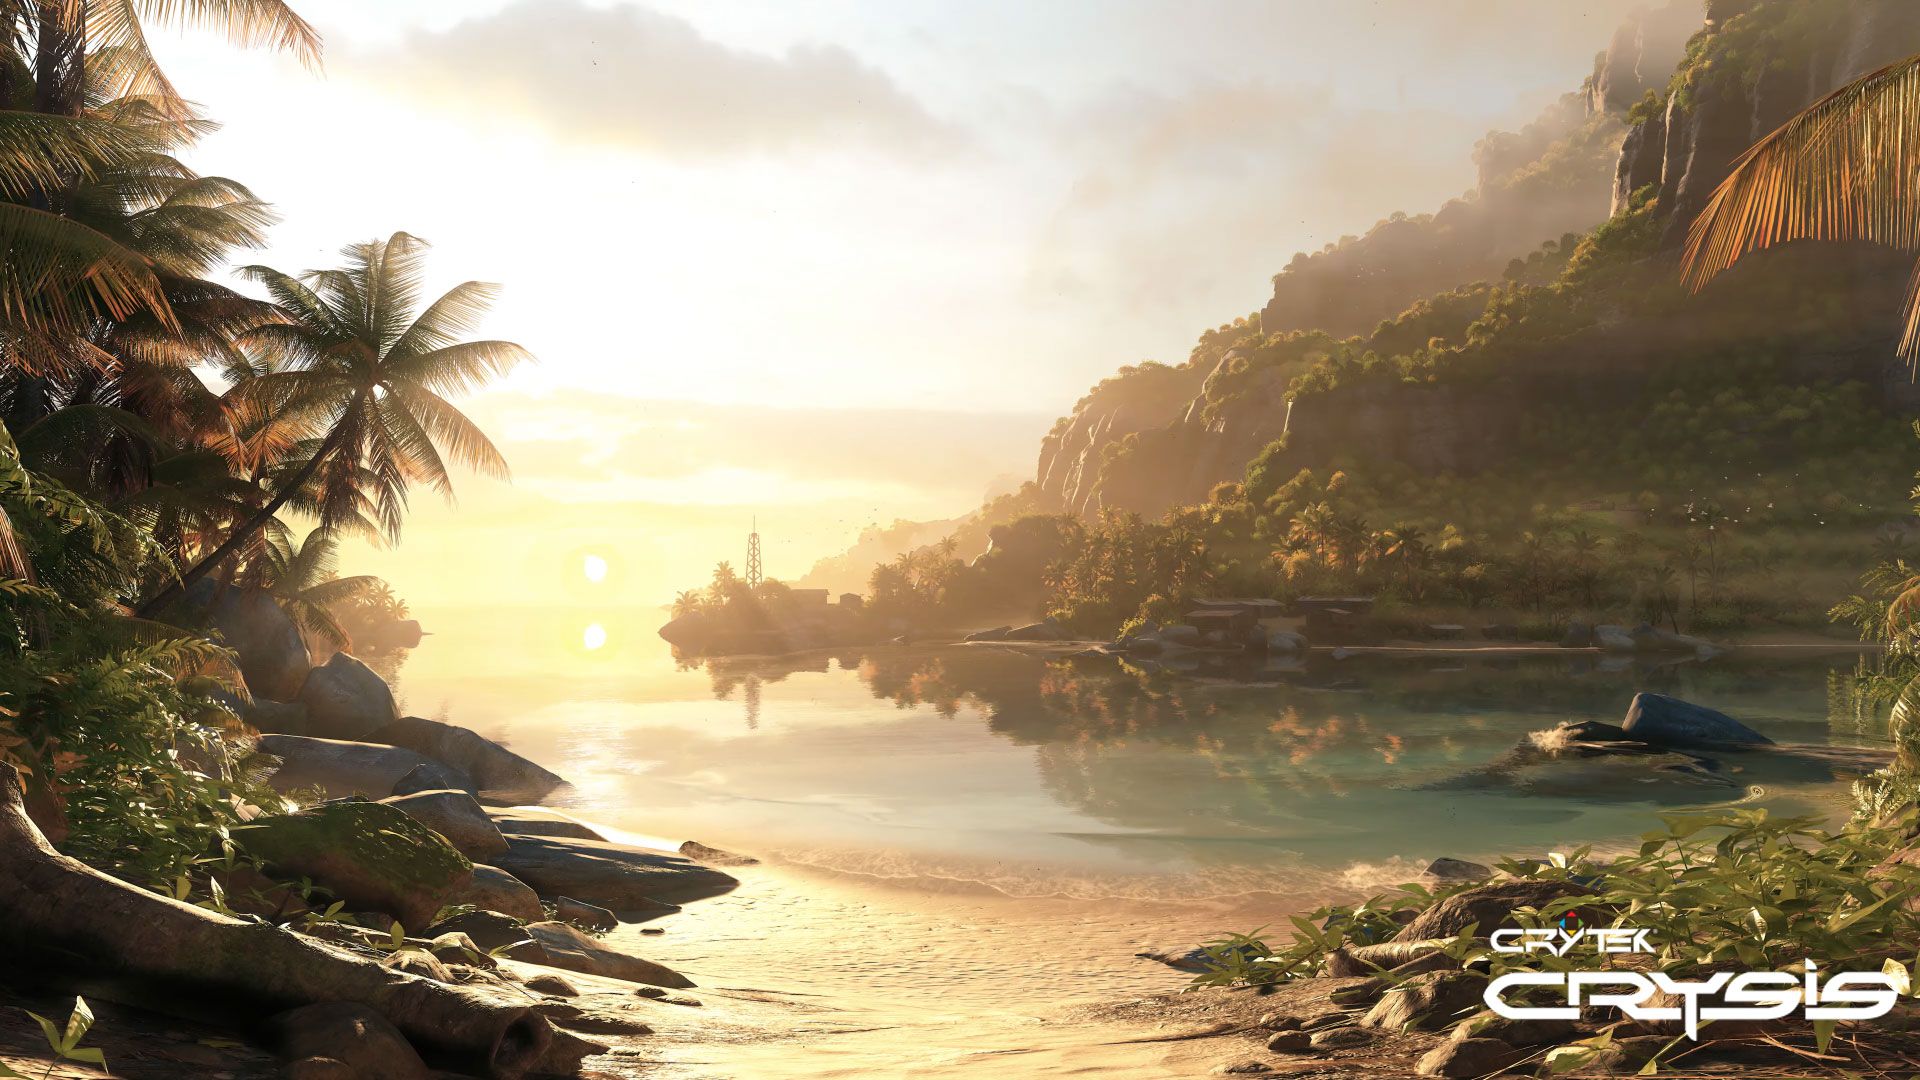 Crysis Remastered Possibly Teased in New Crytek CryEngine Tech Demo Reel